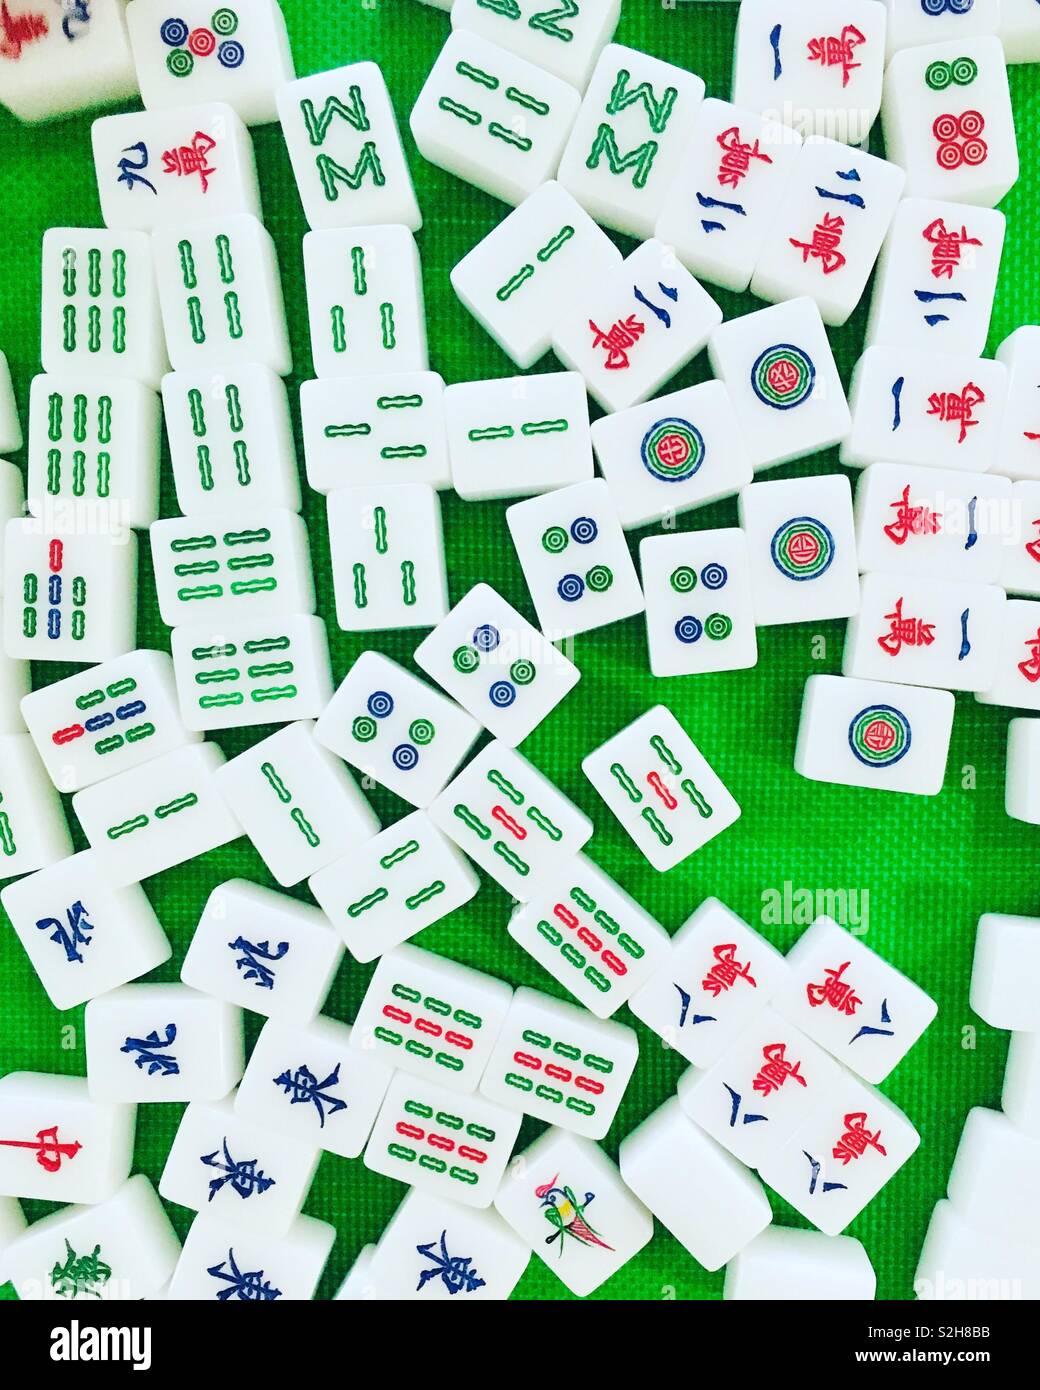 Complete mahjong set with explanations symbols Vector Image